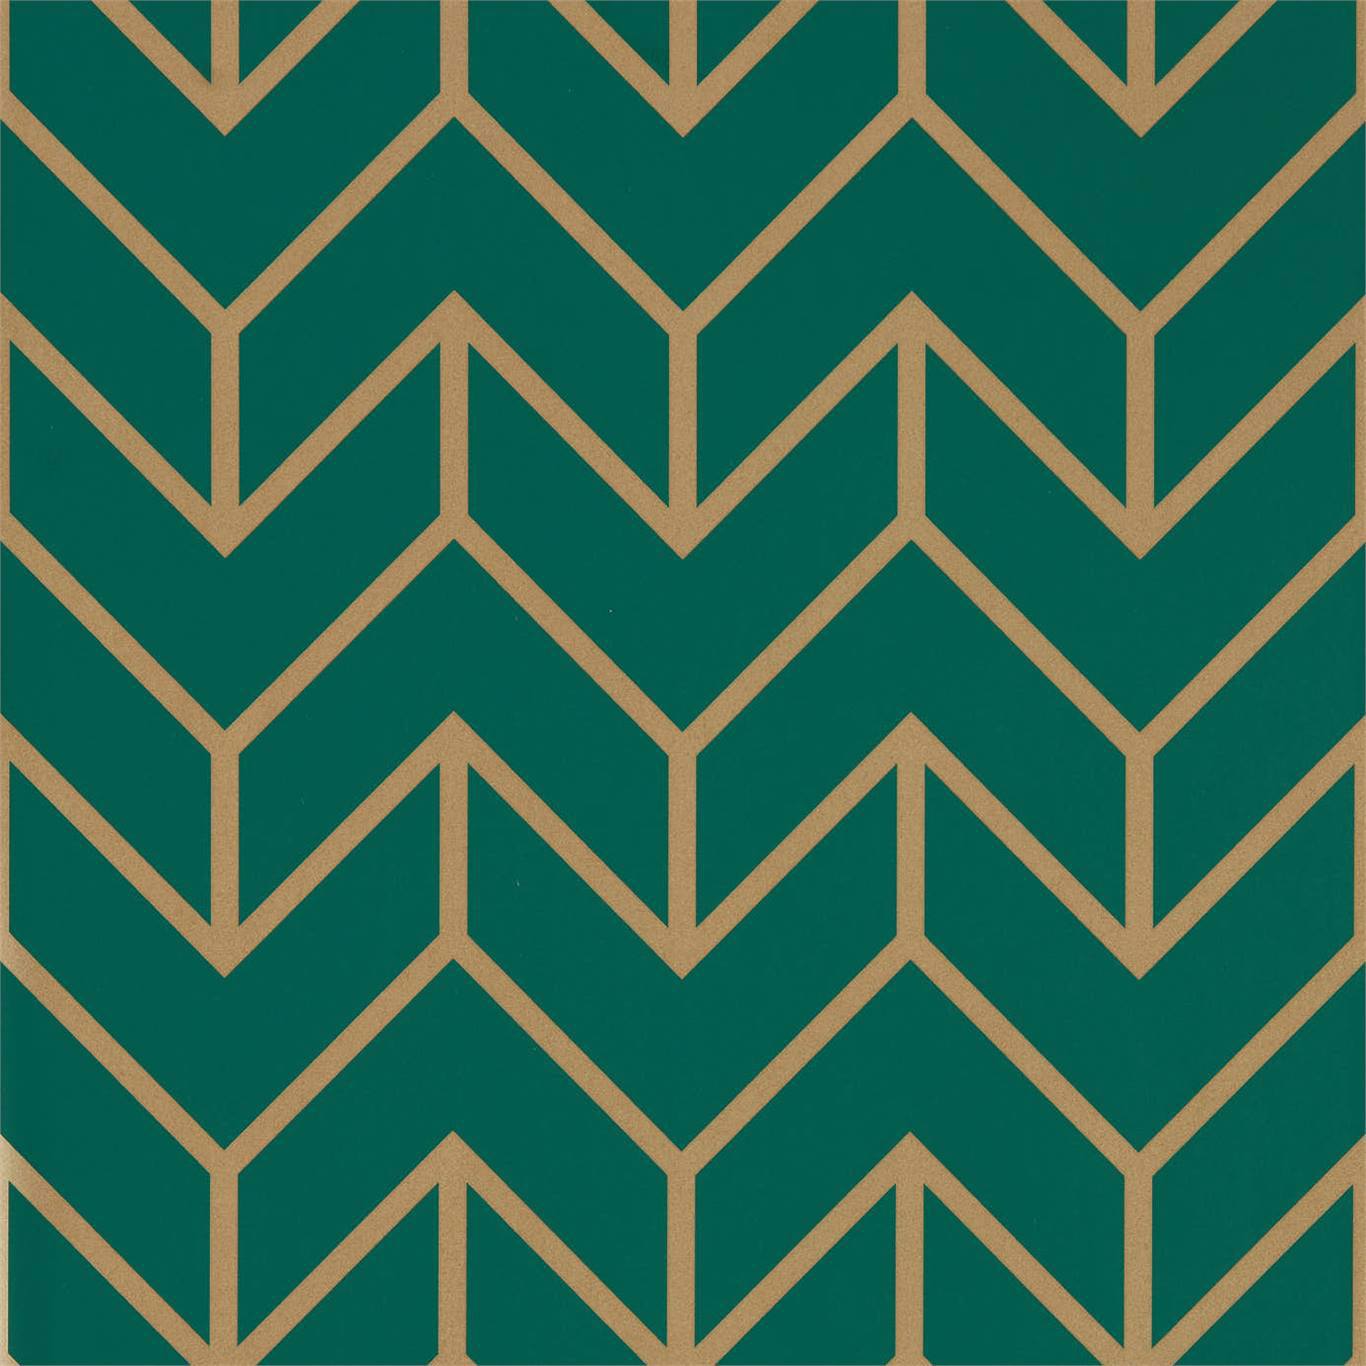 Tessellation Teal/Gold Wallpaper HMWF111984 by Harlequin